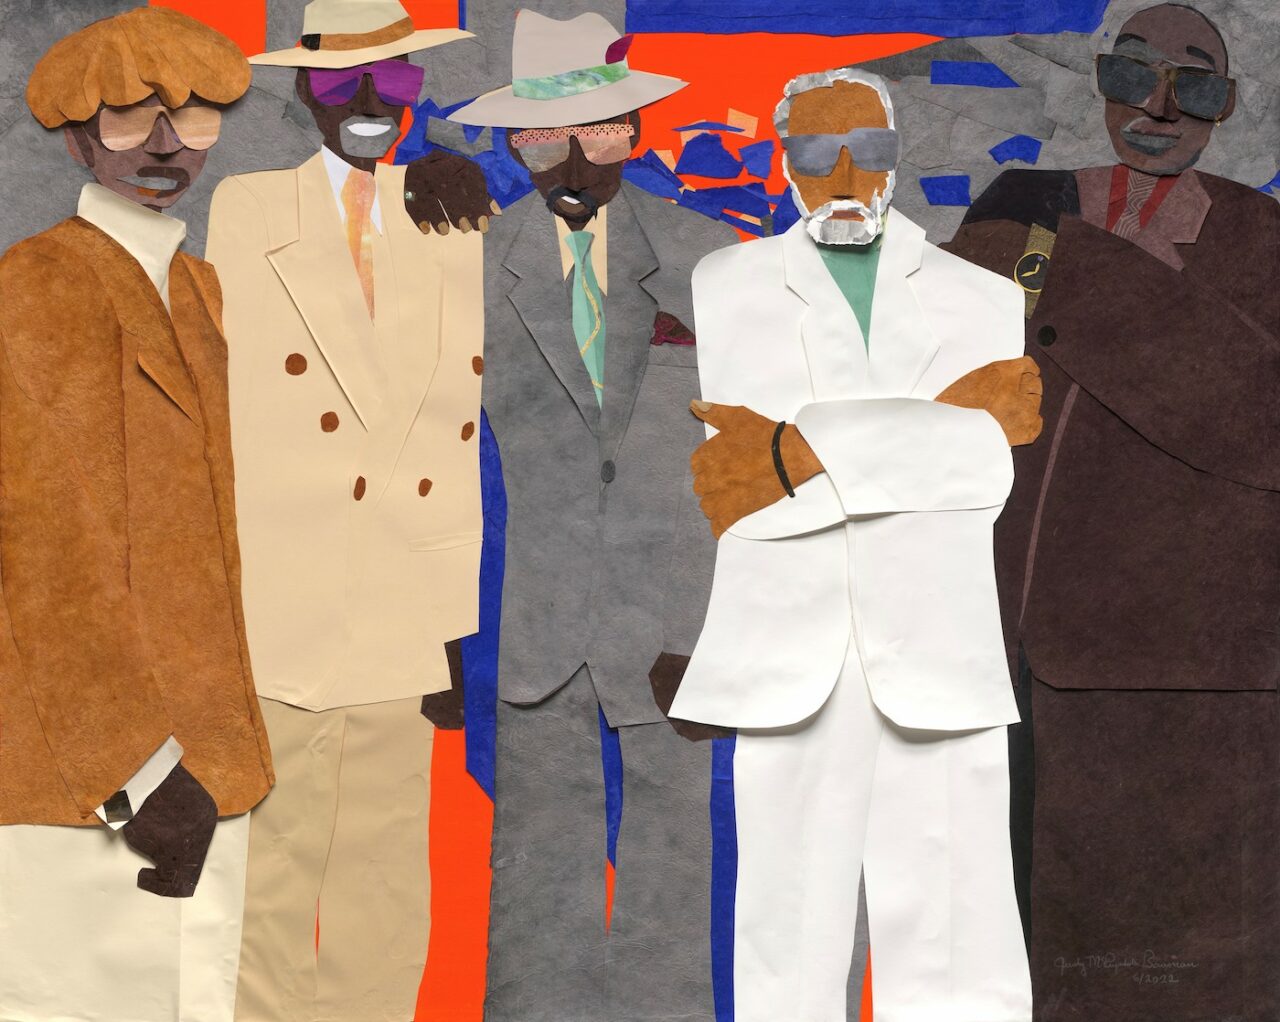 Judy Bowman, Detroit Swagger, 2022. Mixed media
collage on canvas48 x 60 in 121.9 x
152.4 cm. Image courtesy the artist
and Museum of Contemporary Art Detroit